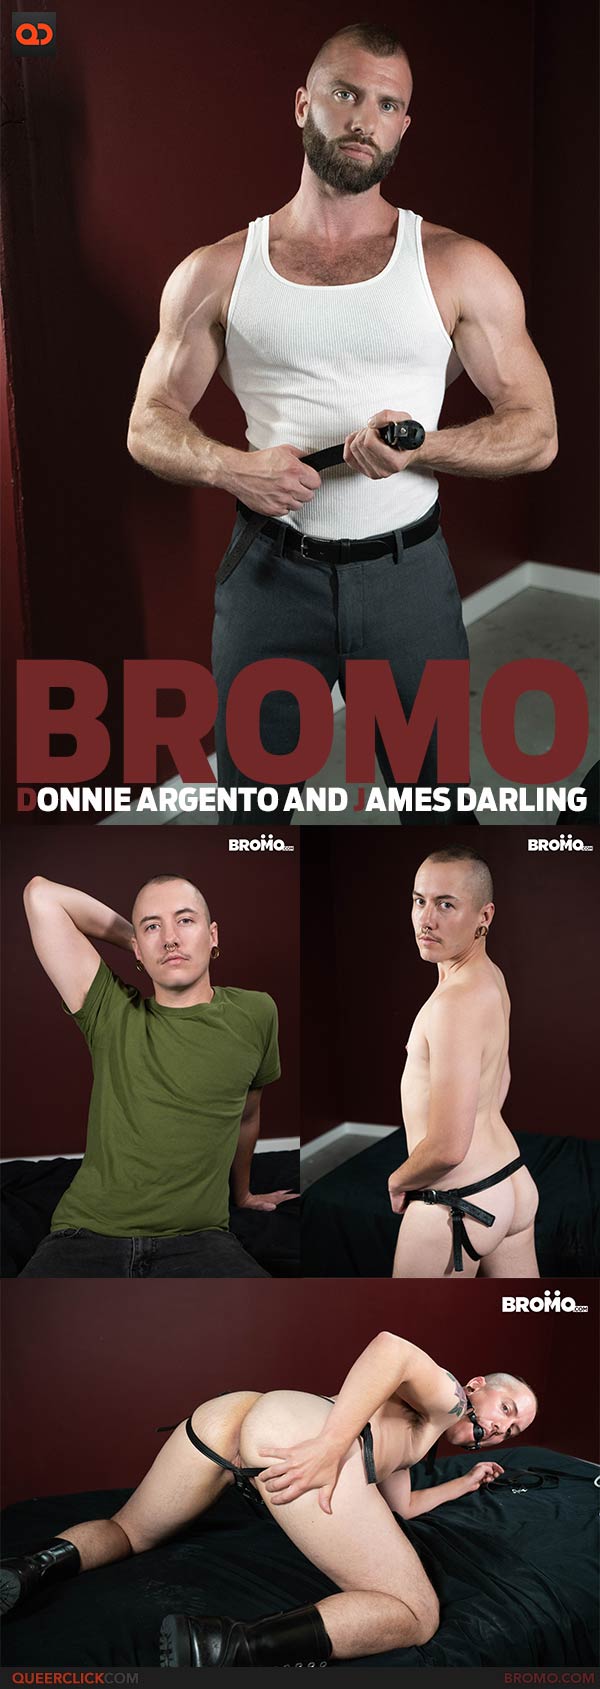 Bromo: Donnie Argento and James Darling